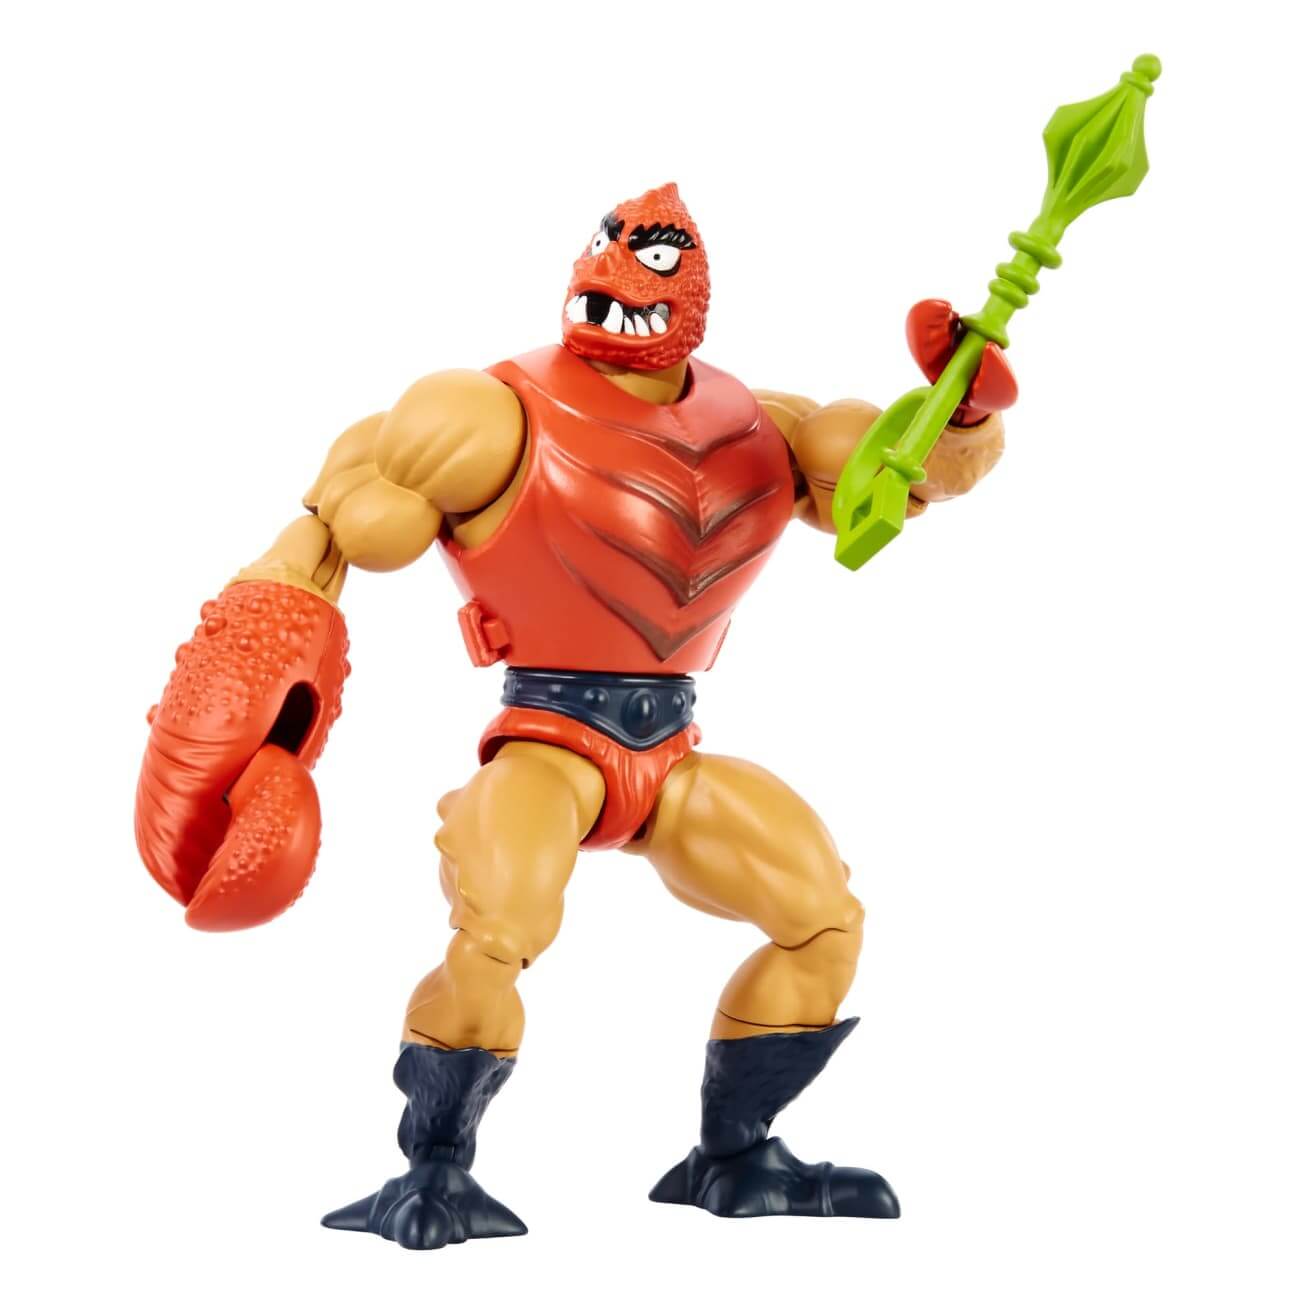 masters of the universe origins clawful action pose holding weapon to strike